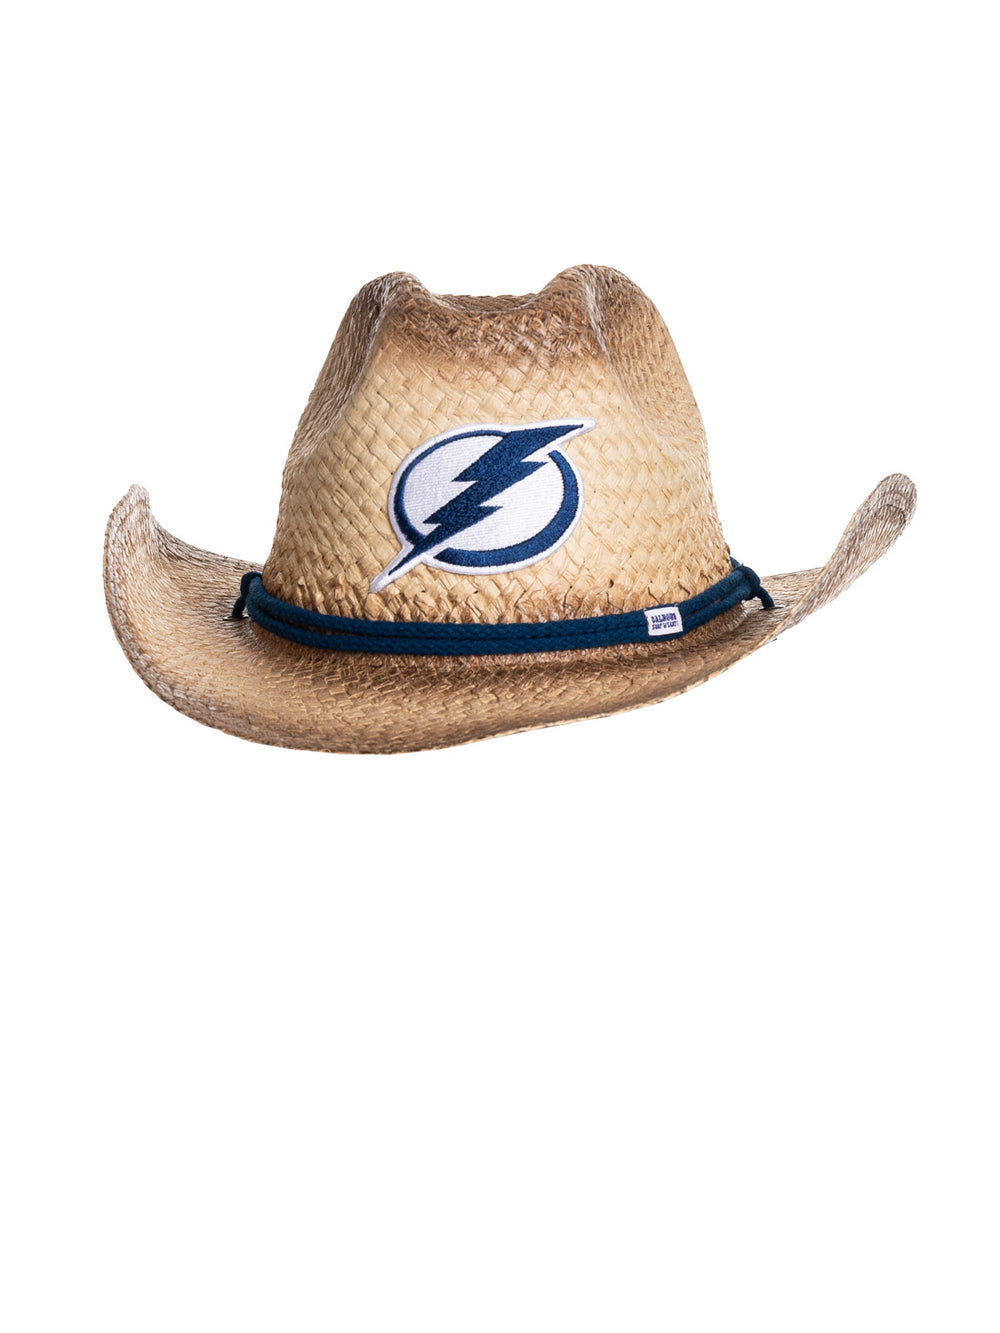 The front of the Tampa Bay Lightning straw cowboy hat. It is a tan straw hat with the Lightning logo in the centre of it, with a navy blue rope running along the crown of the hat.